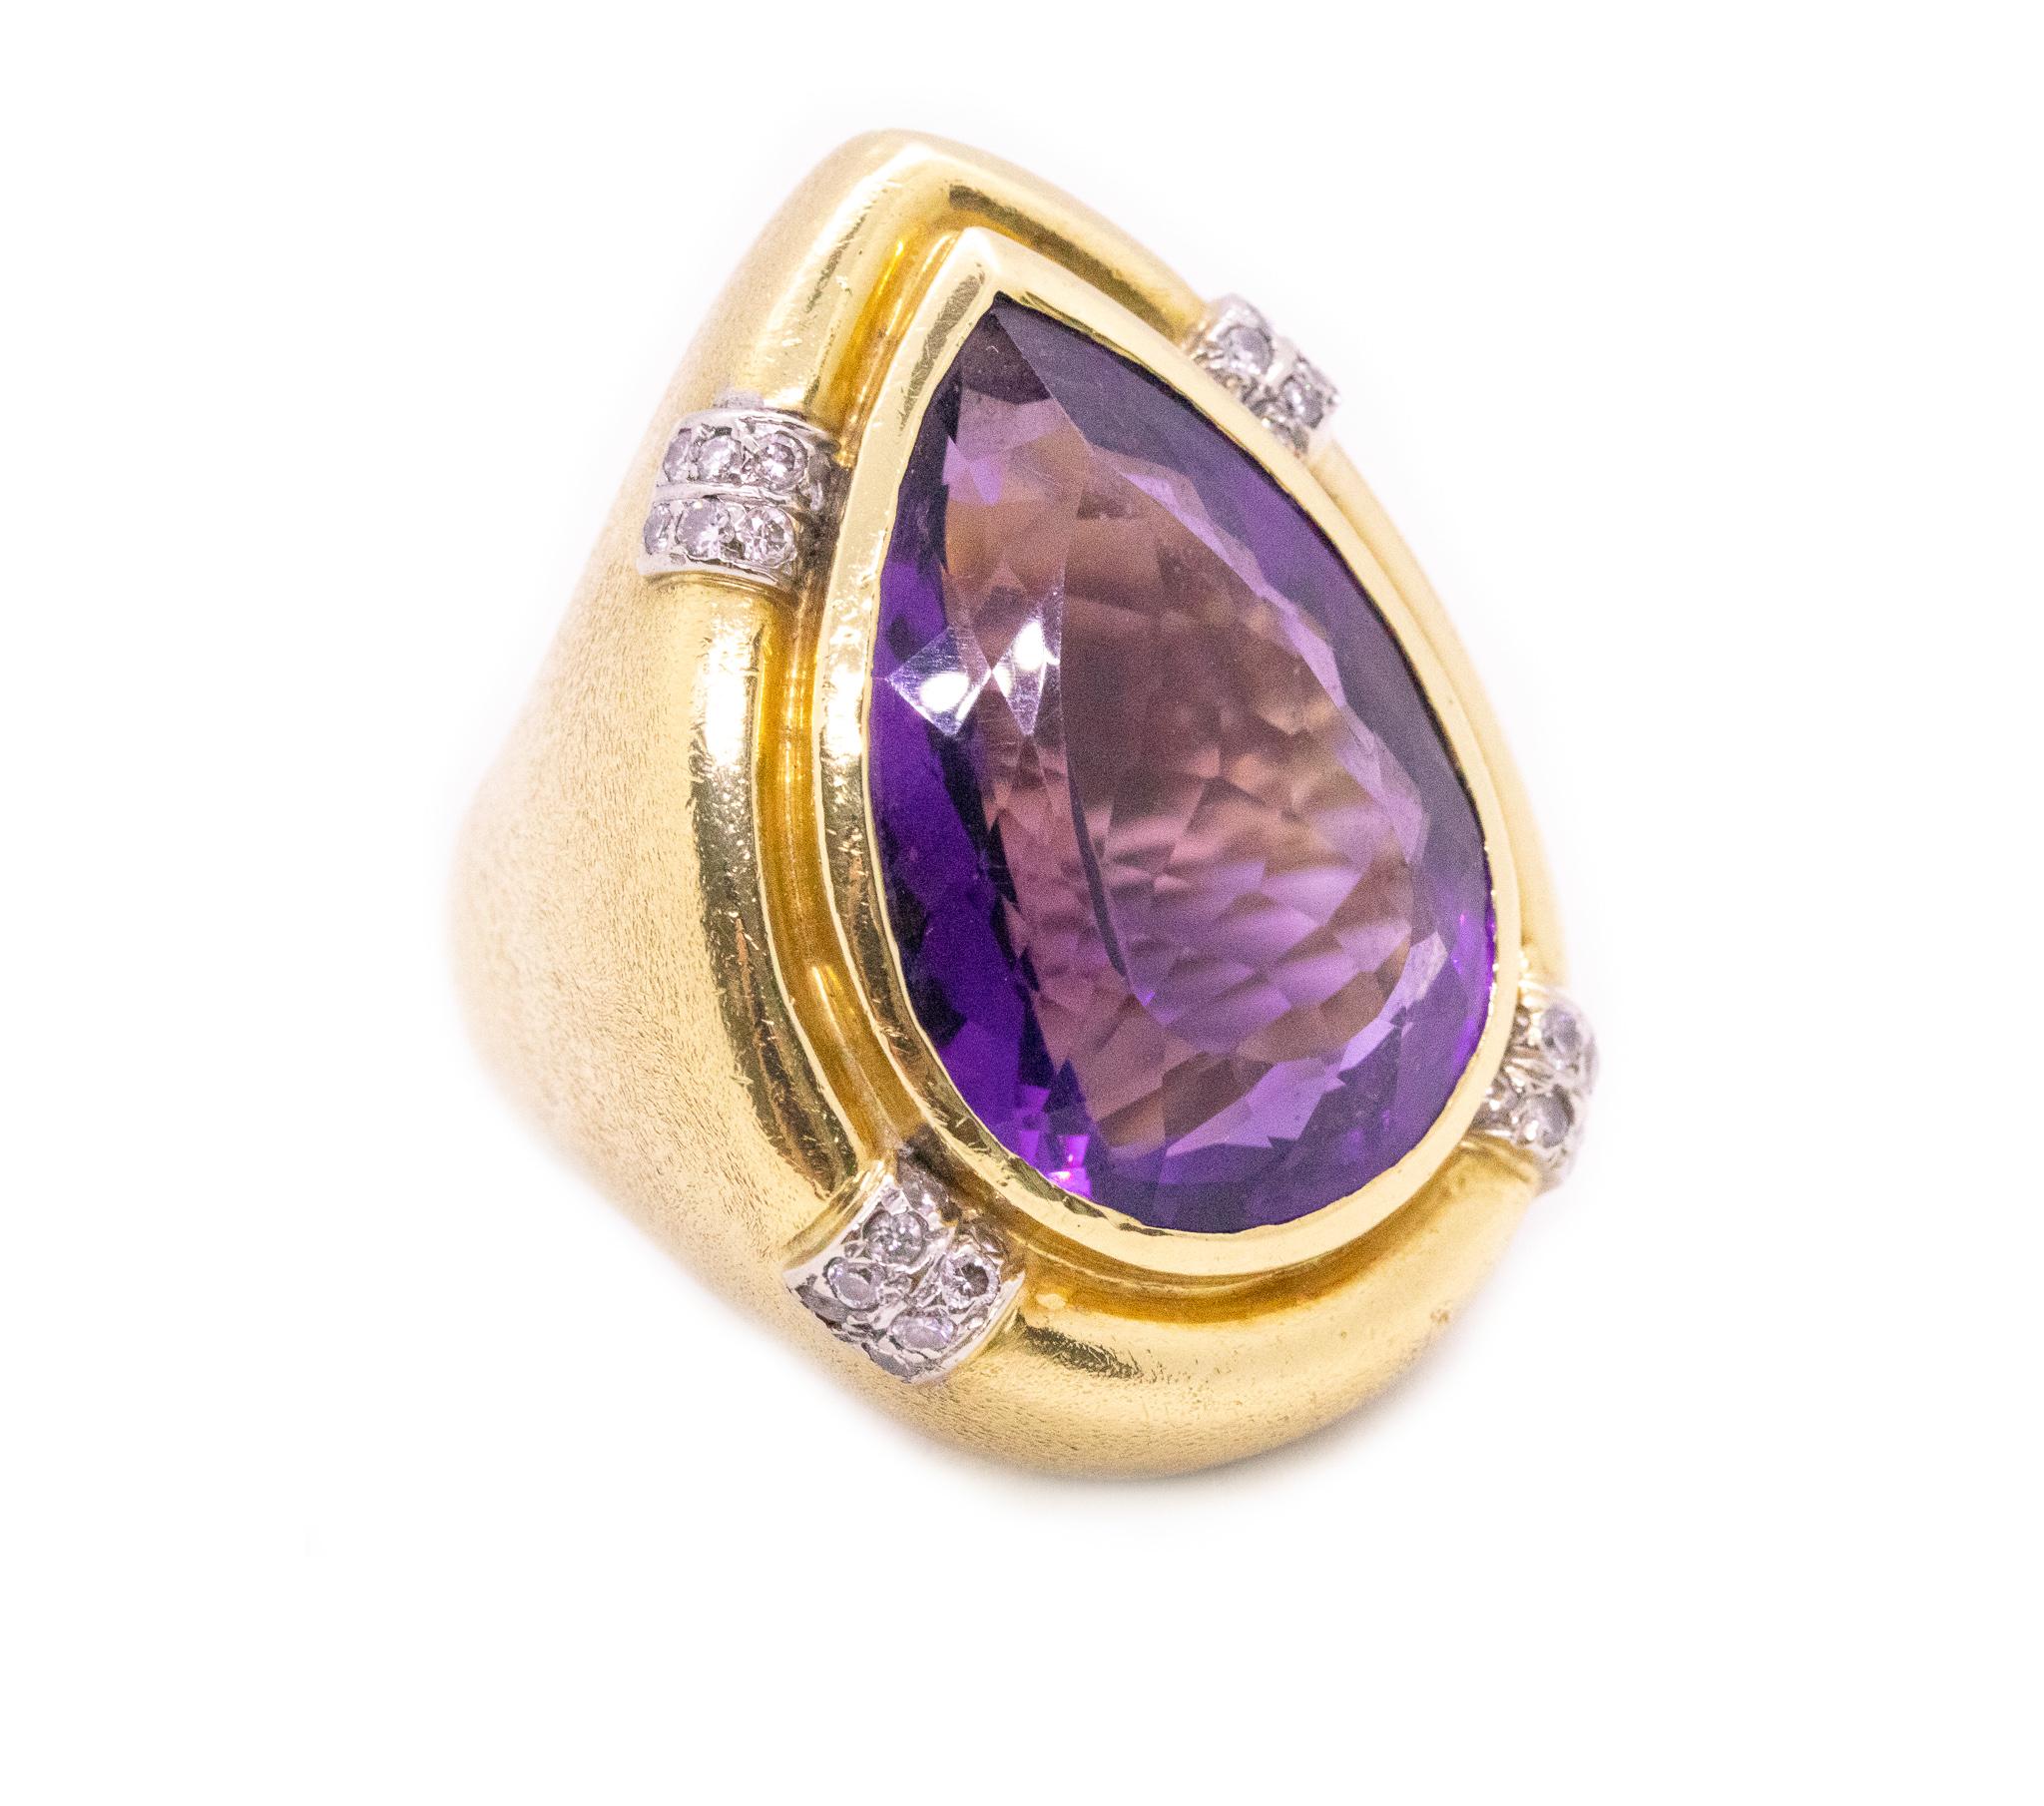 Mixed Cut Retro 1970 Oversized Cocktail Ring 18Kt Gold 31.77 Cts in Diamonds and Amethyst